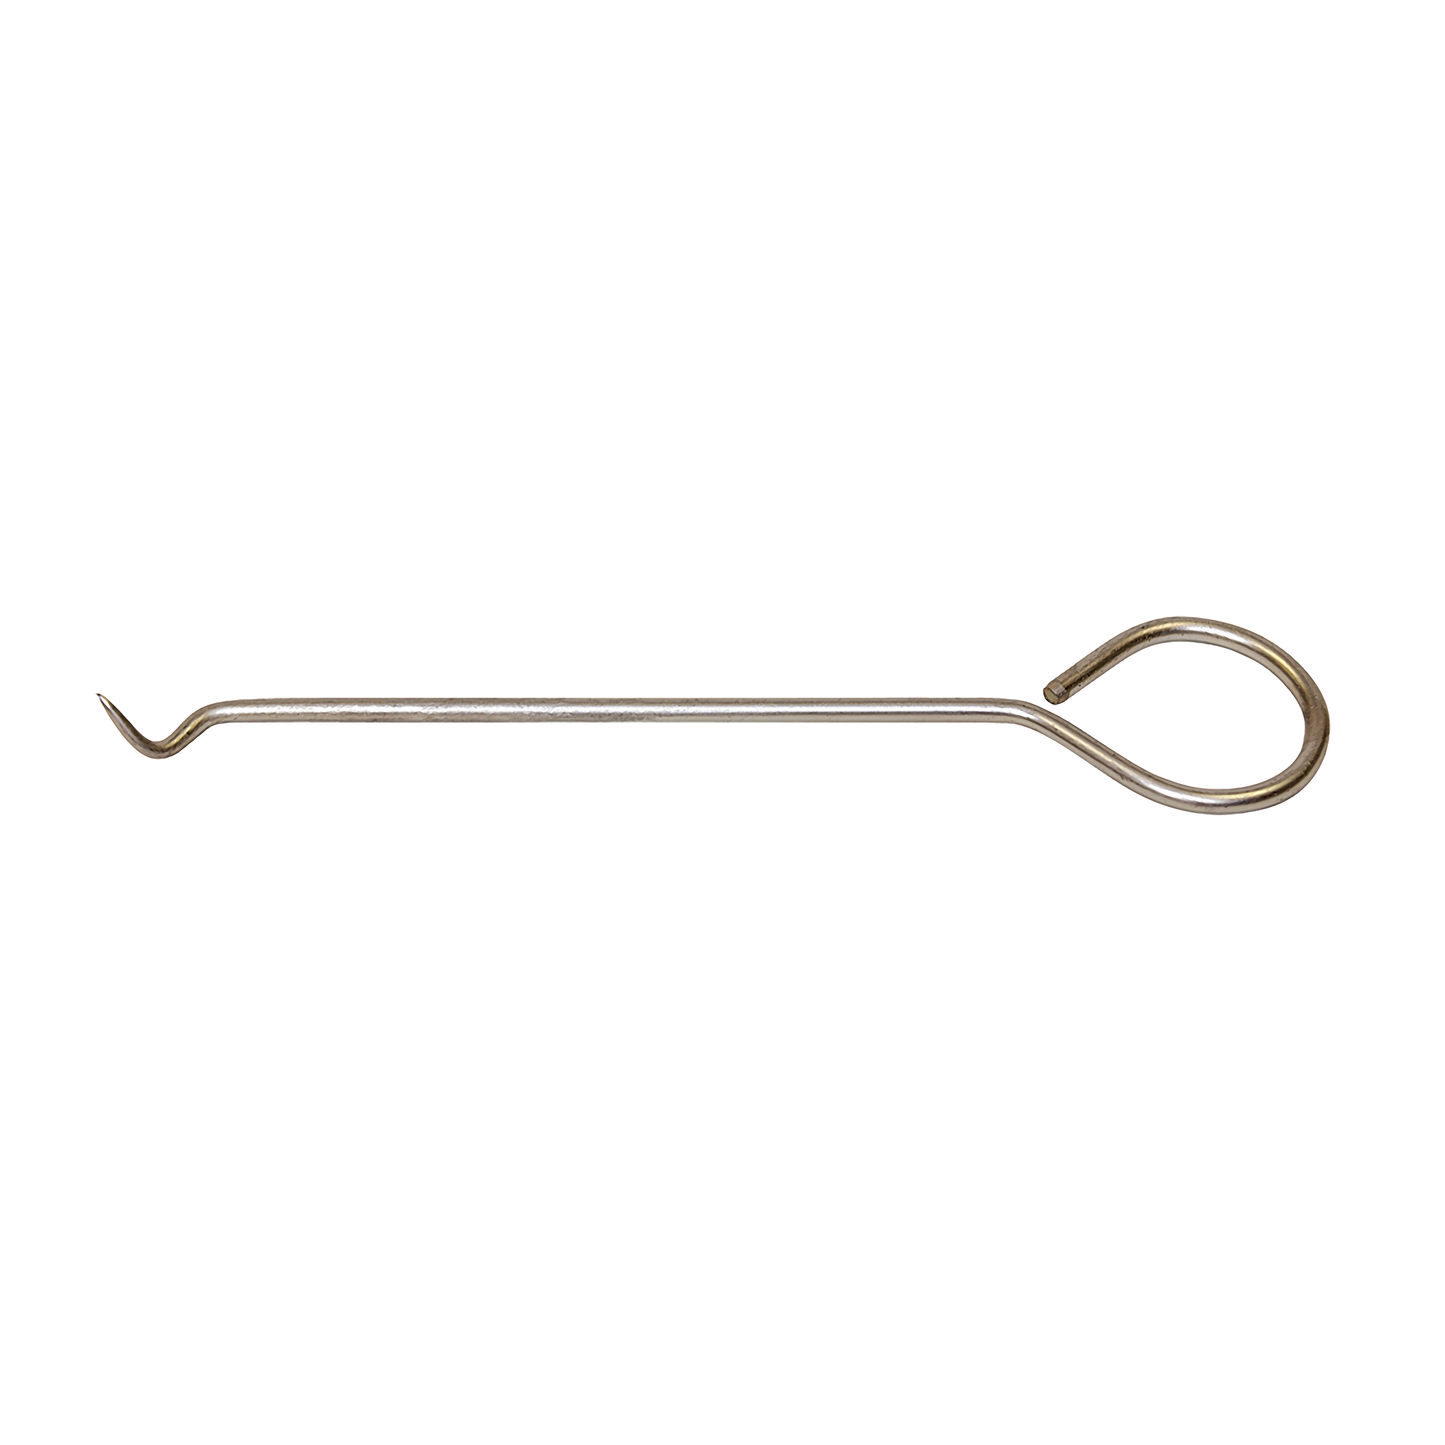 O-ring Extractor Packing Hook (AX1231)